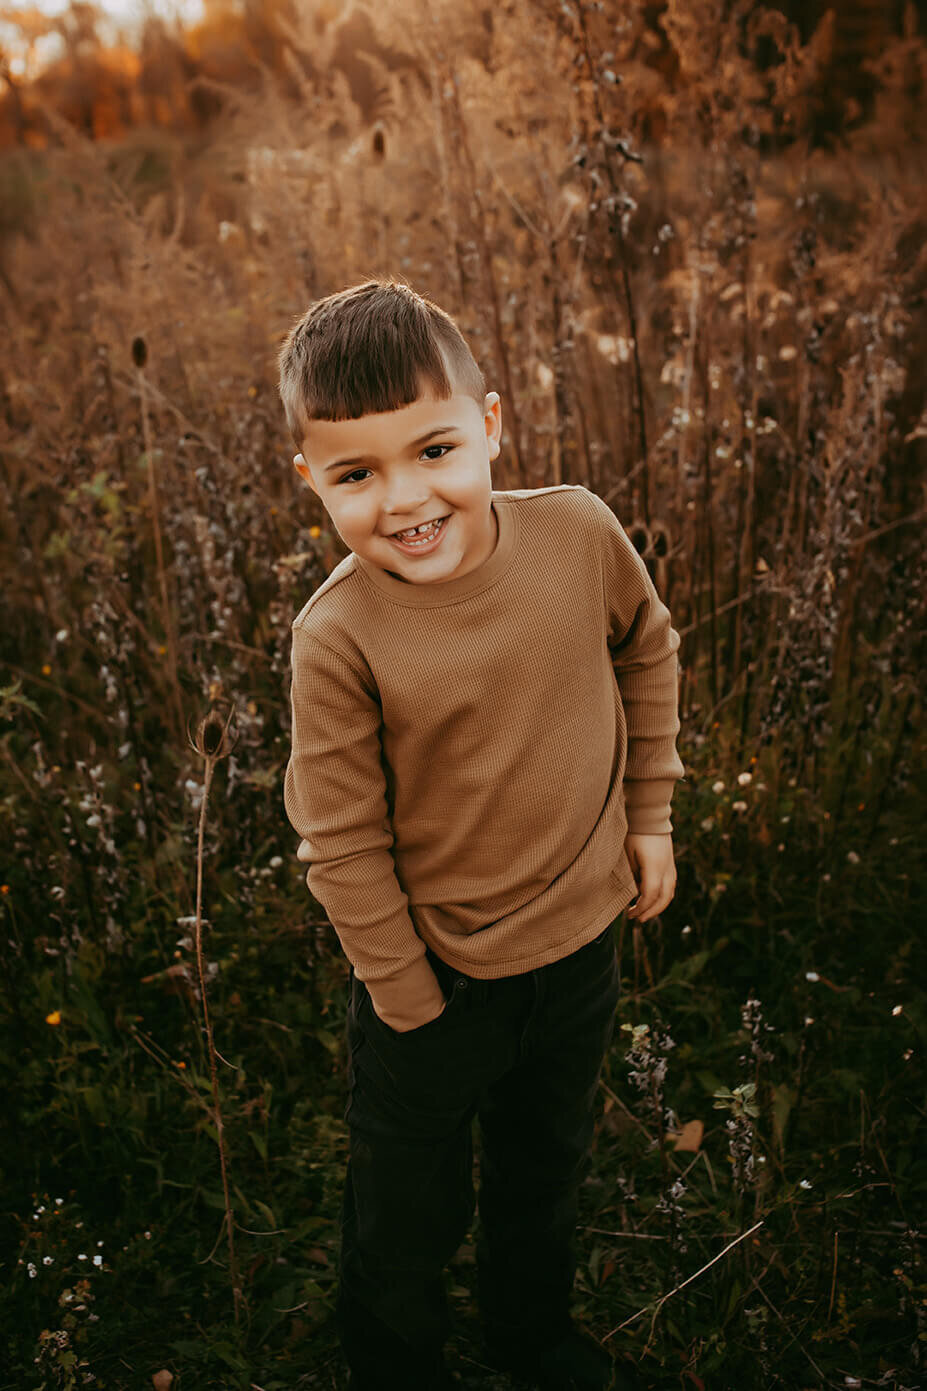 a five year old boy with his hand in his pocket looking and smiling at the camera in a field